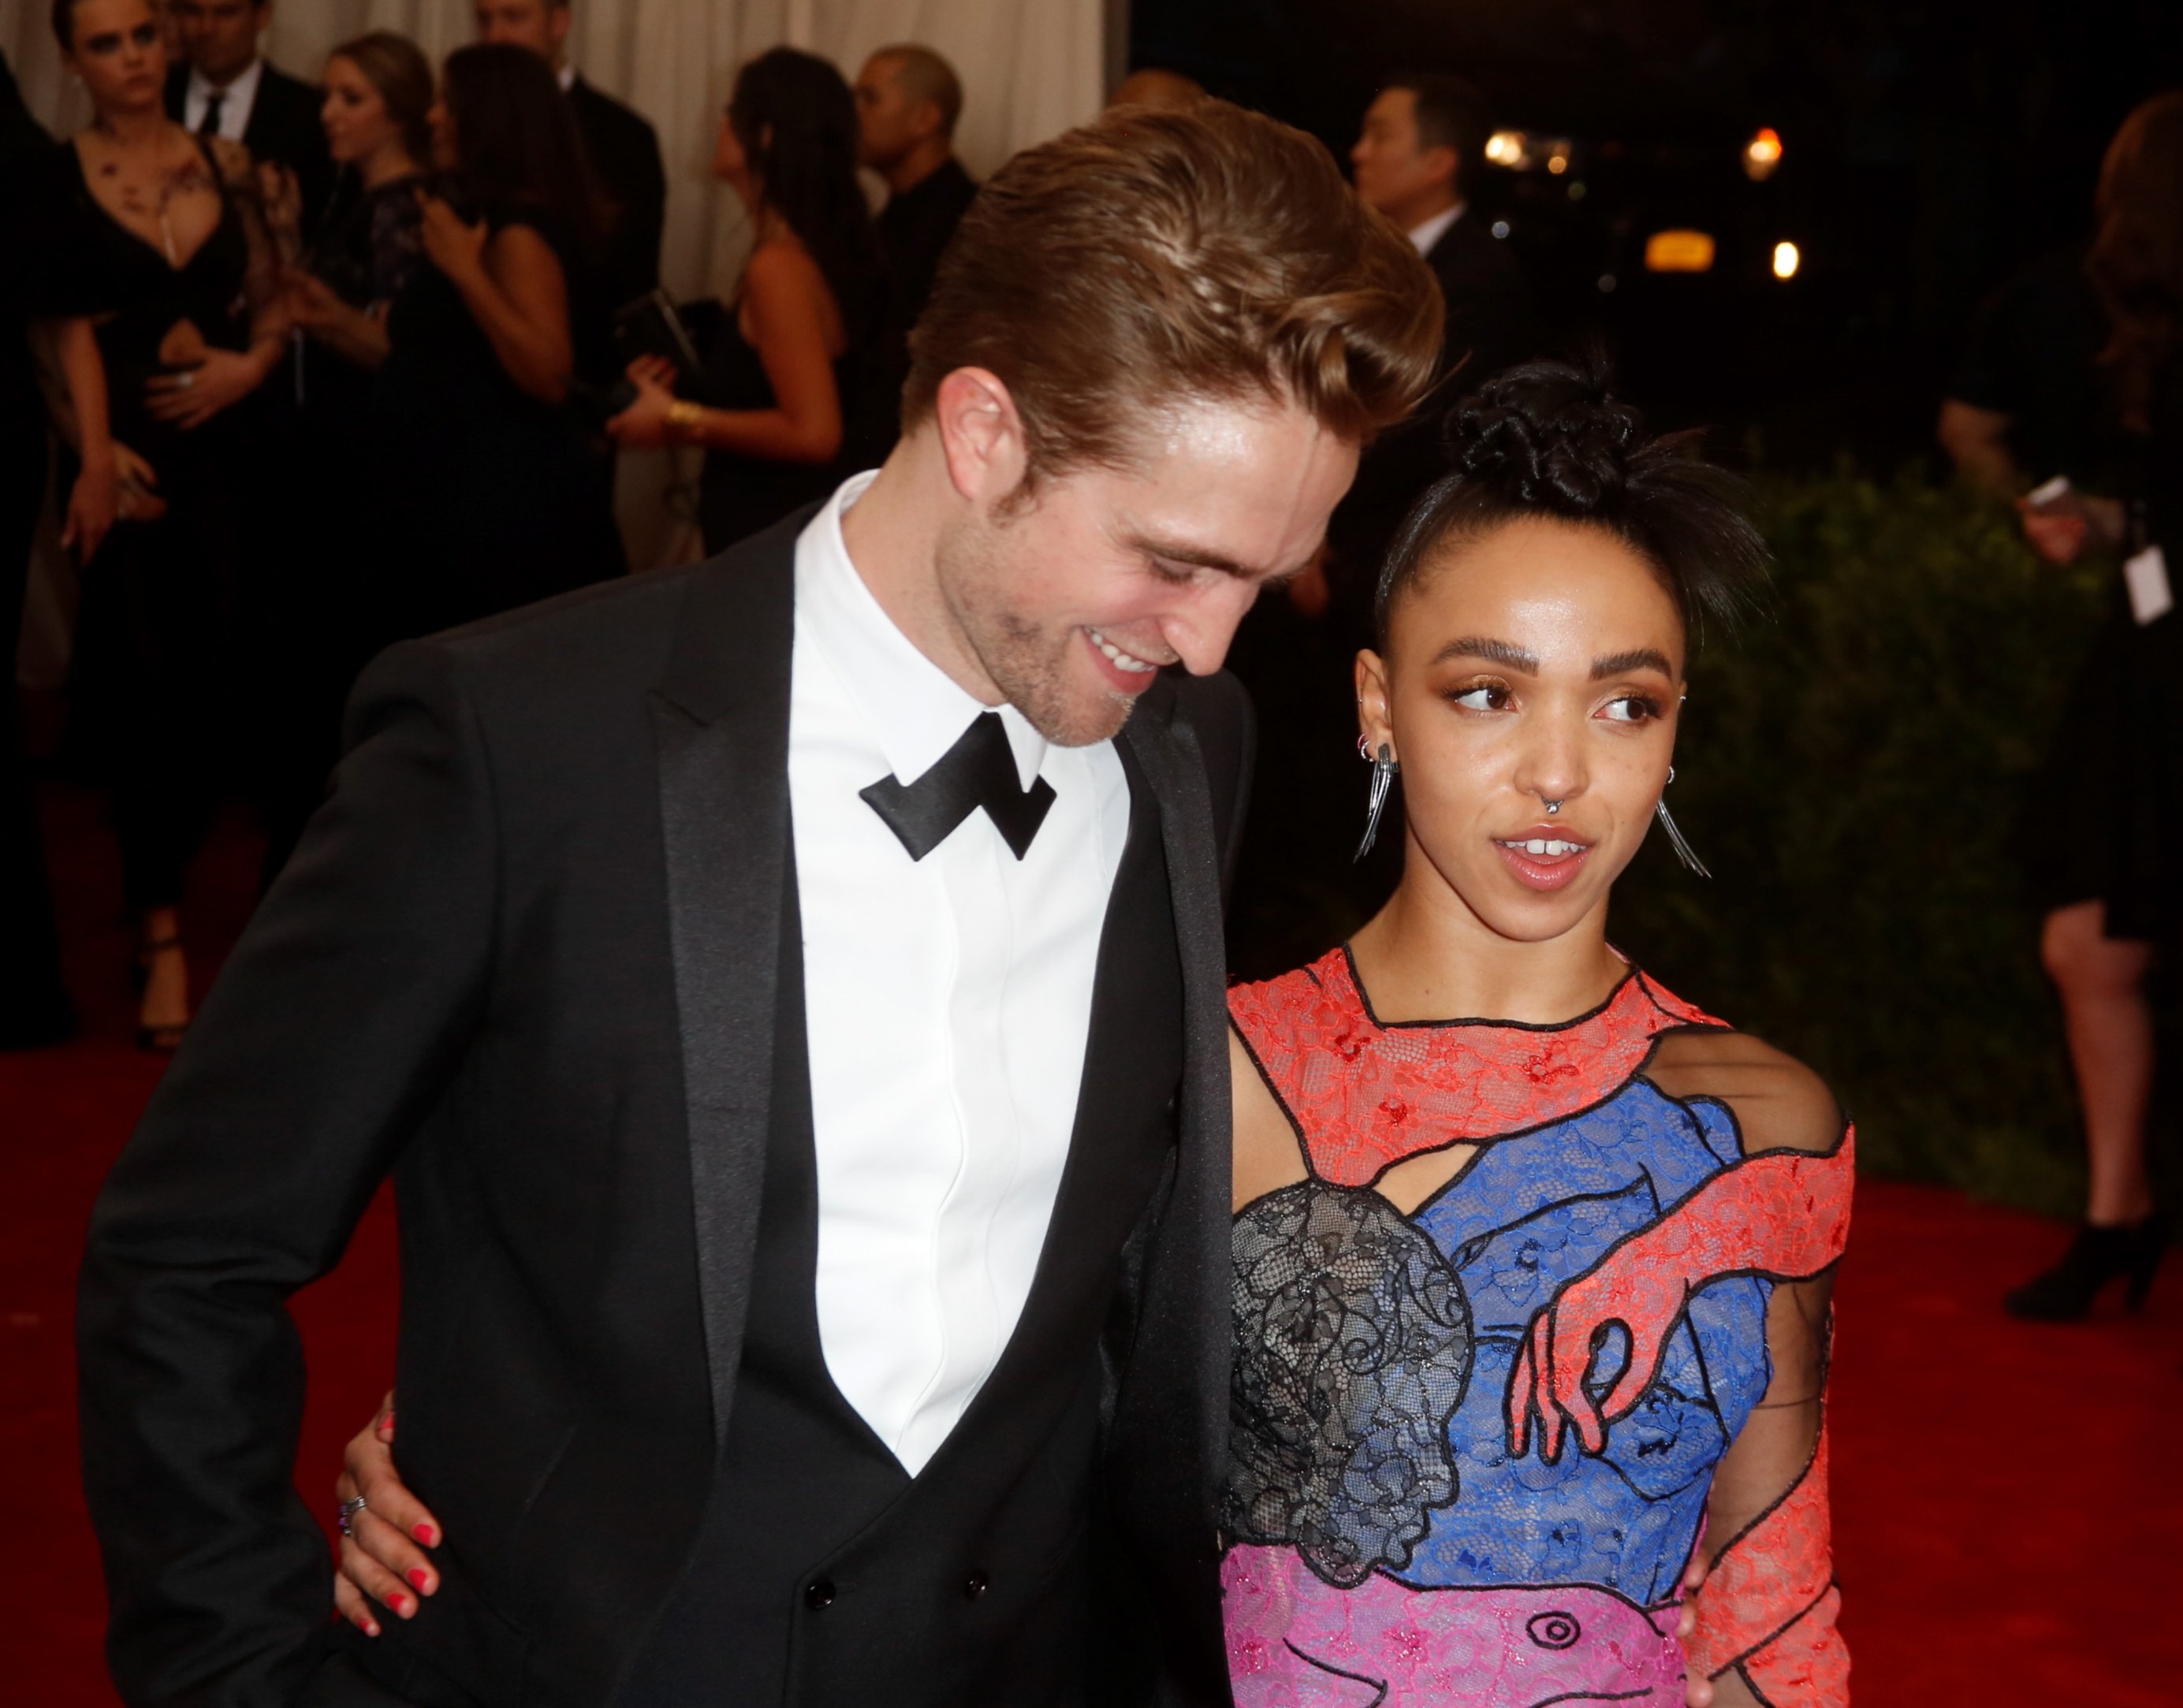 British actor Robert Pattinson and singer FKA twigs attend the 2015 Costume Institute Gala Benefit celebrating the exhibition 'China: Through the Looking Glass' at The Metropolitan Museum of Art in New York, USA, on 04 May 2015. | Source: Getty Images